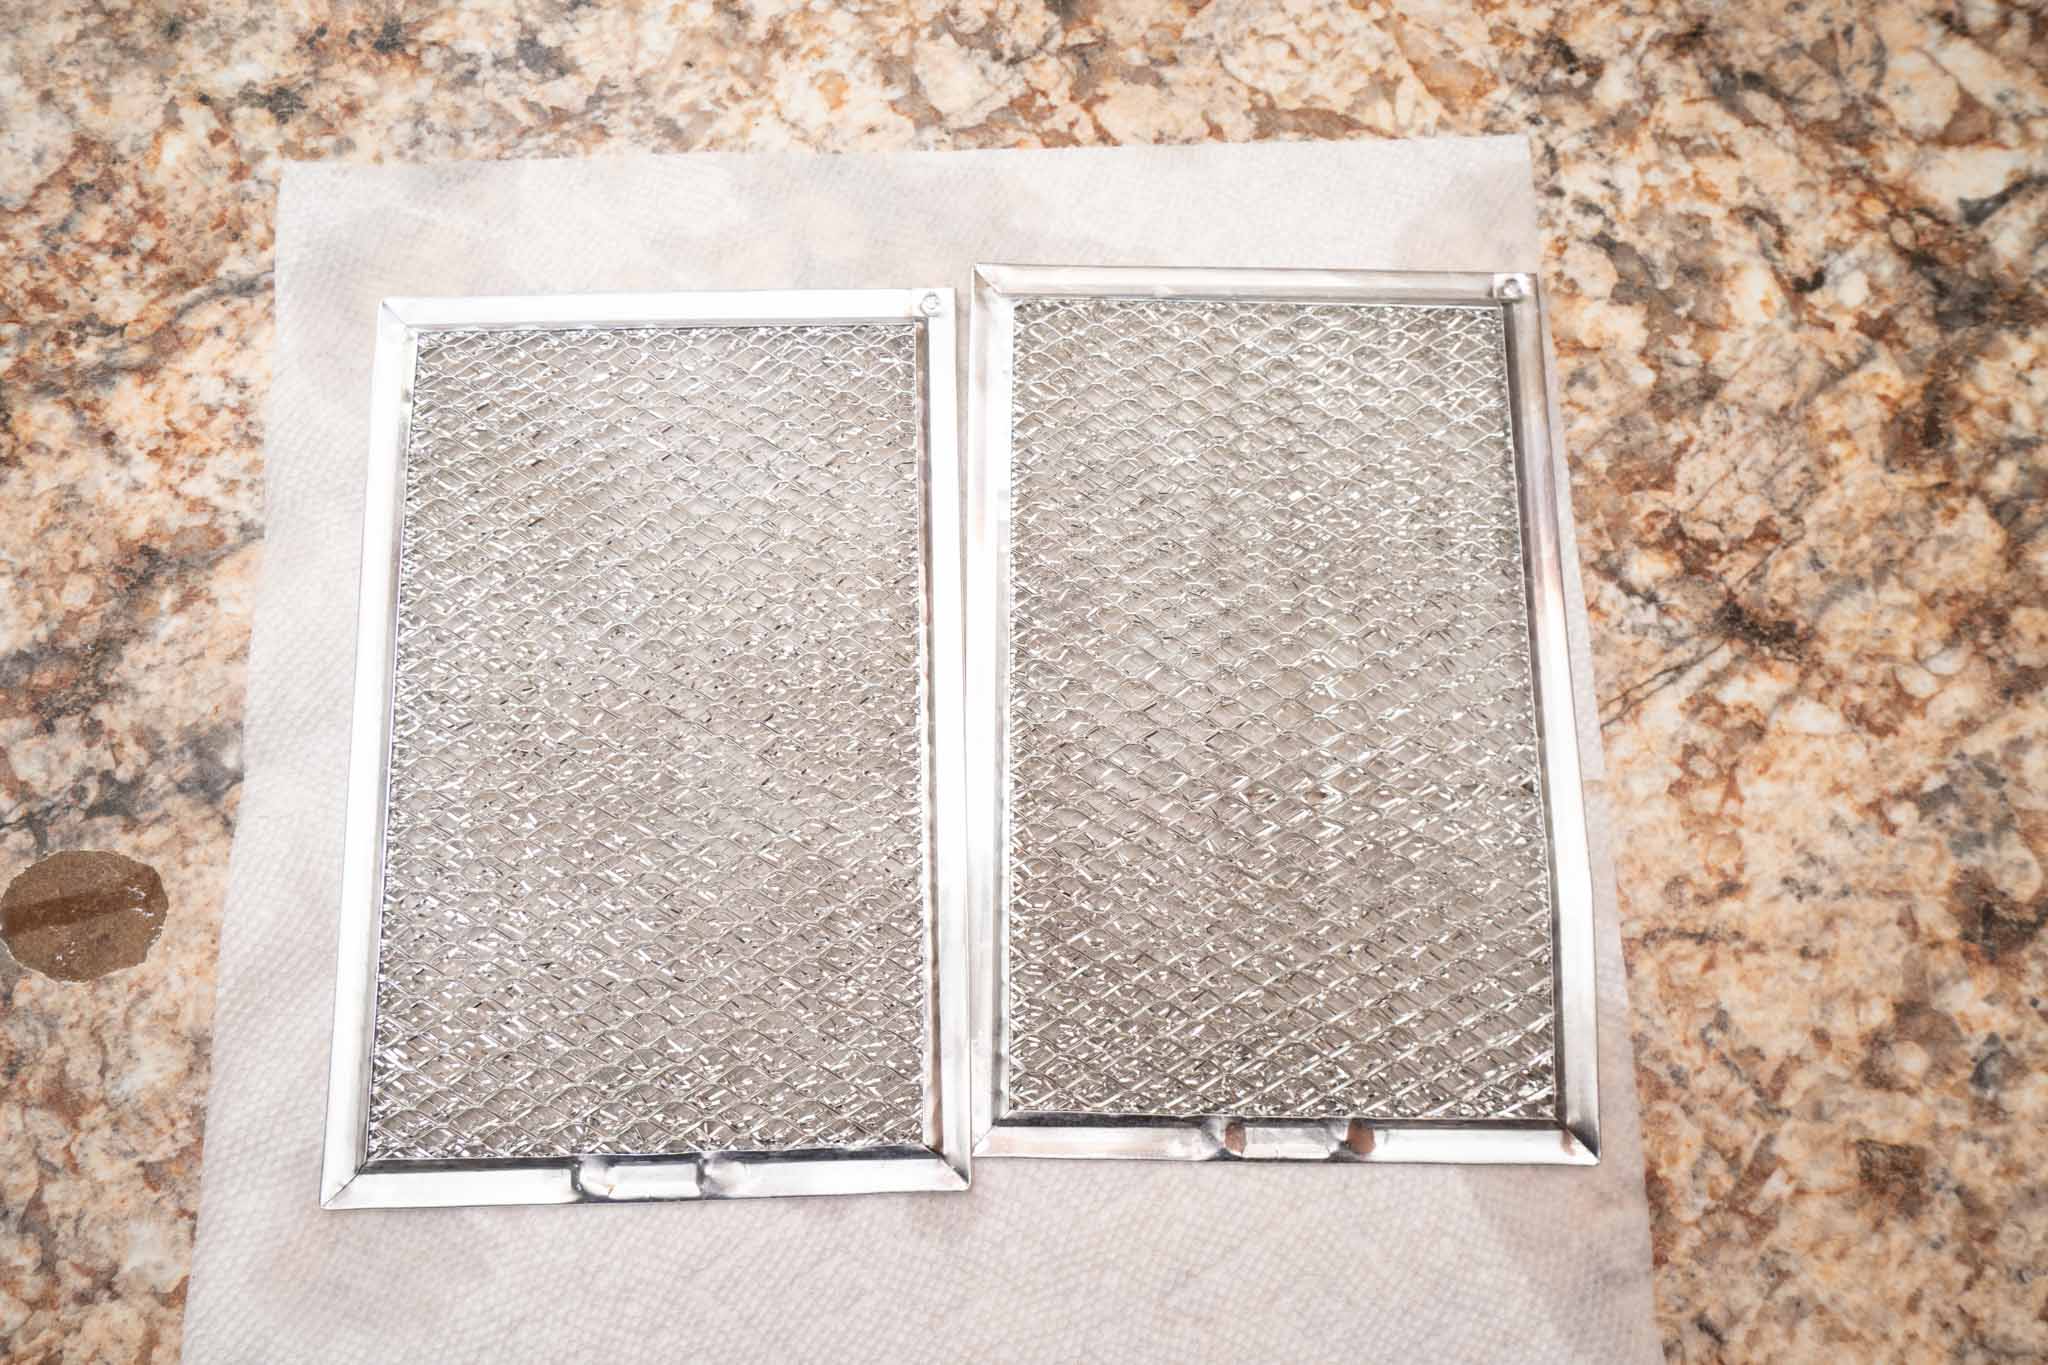 drying microwave filters